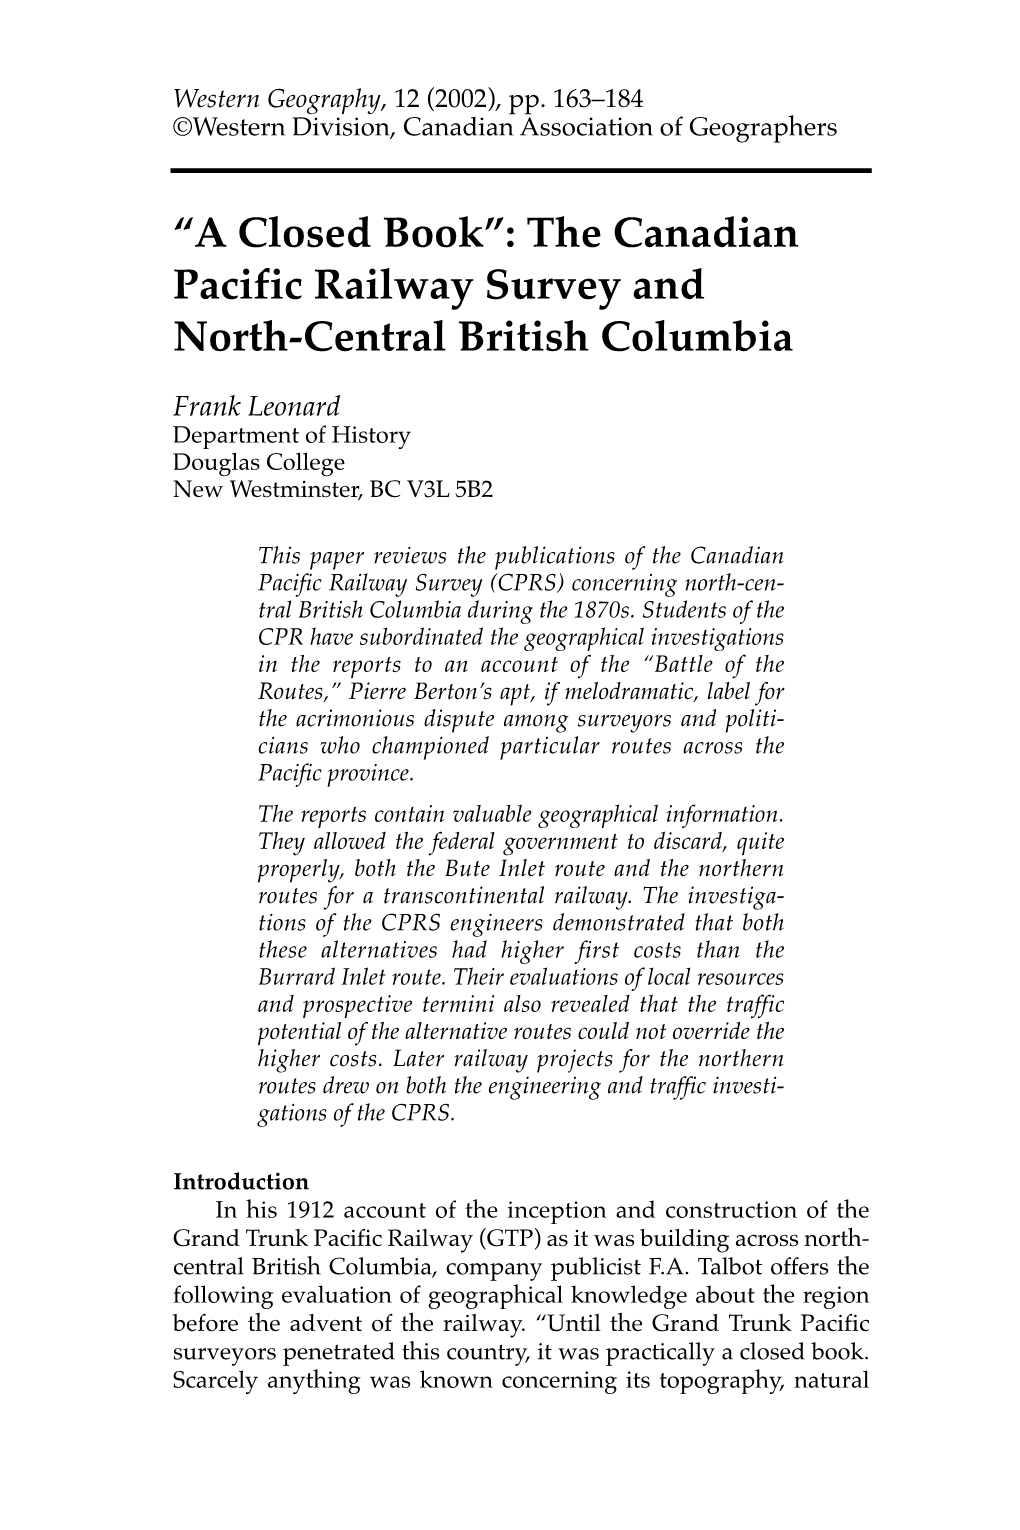 "A Closed Book": the Canadian Pacific Railway Survey and North-Central British Columbia